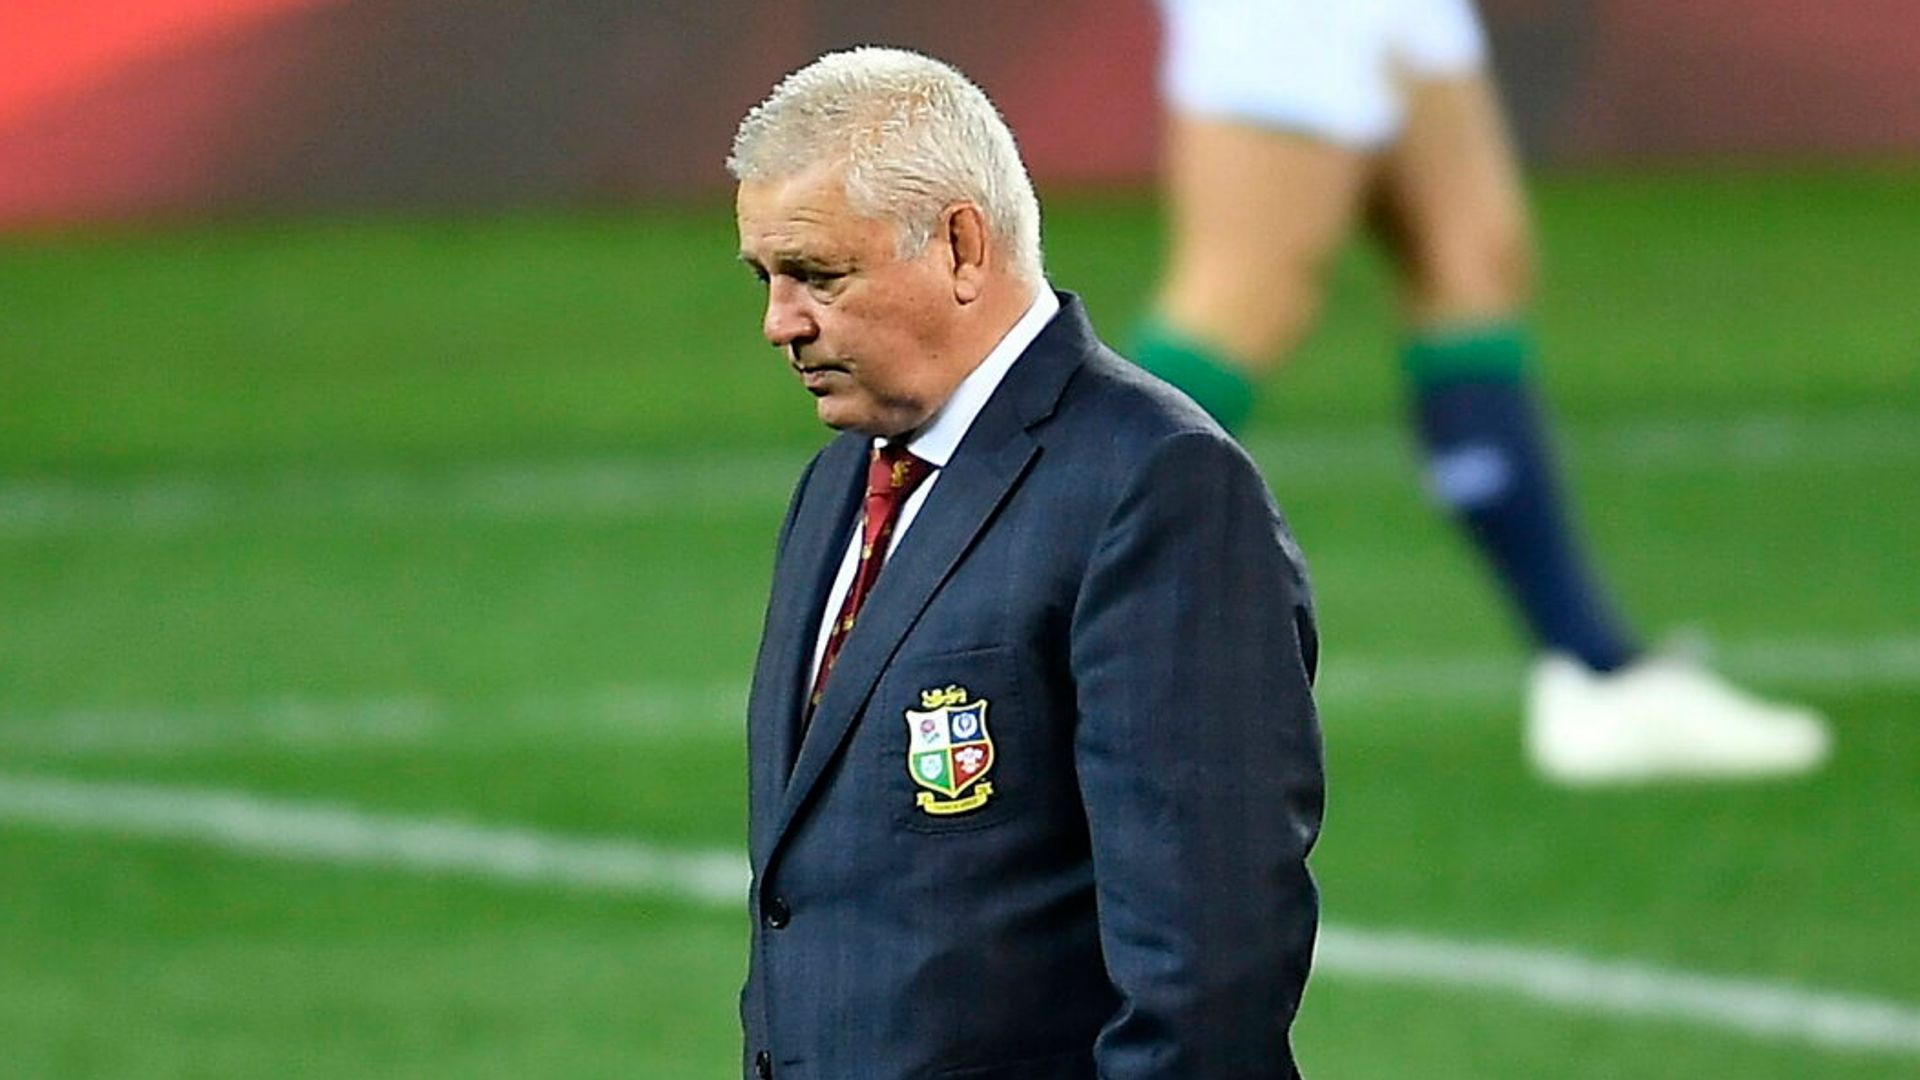 Gatland: Lions 'pretty positive' after South Africa 'A' loss